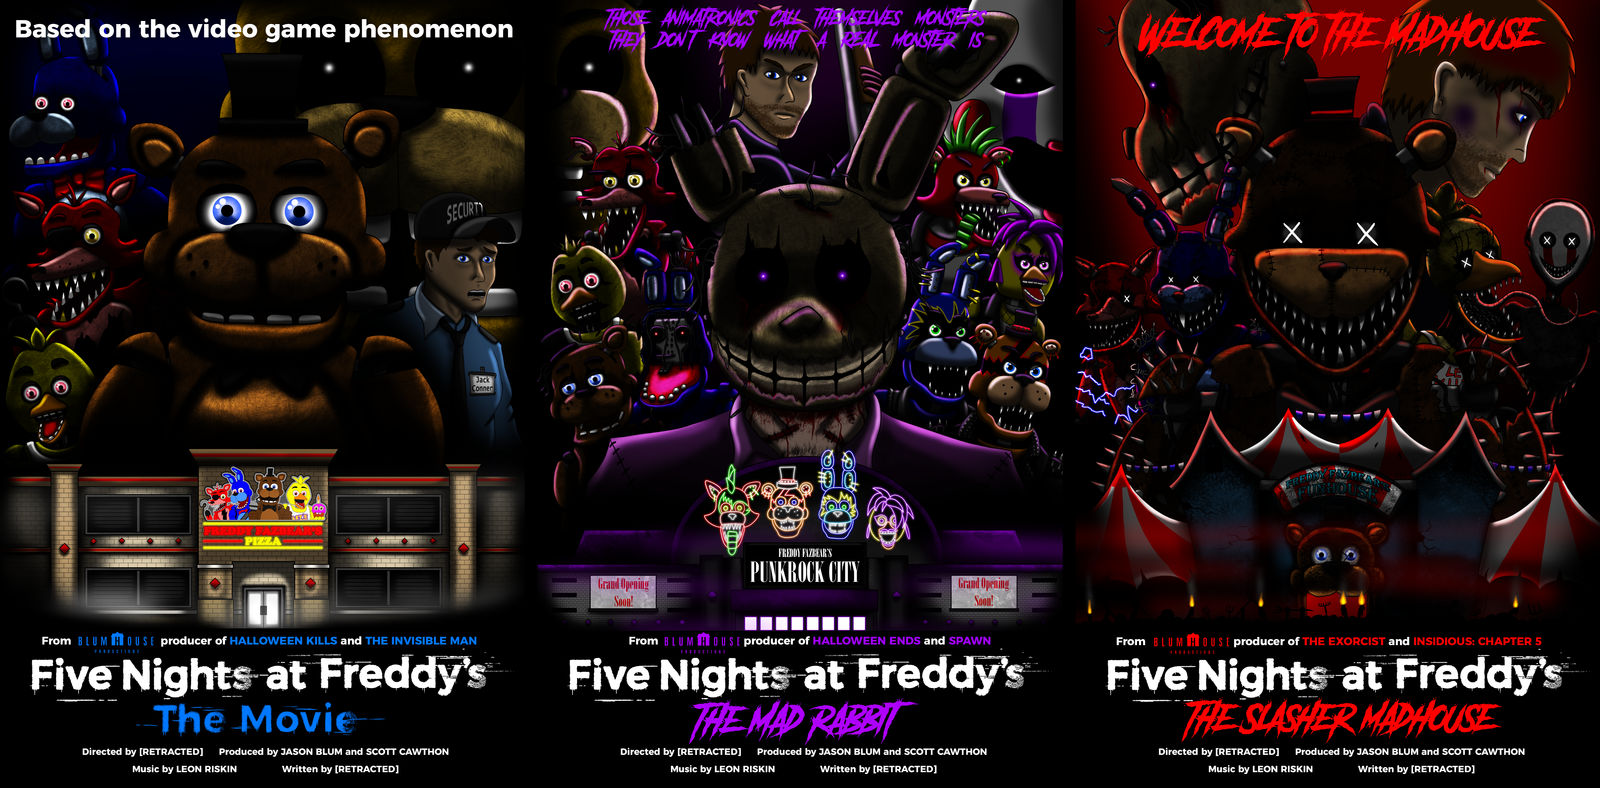 How They Made the Animatronics in Five Nights at Freddy's